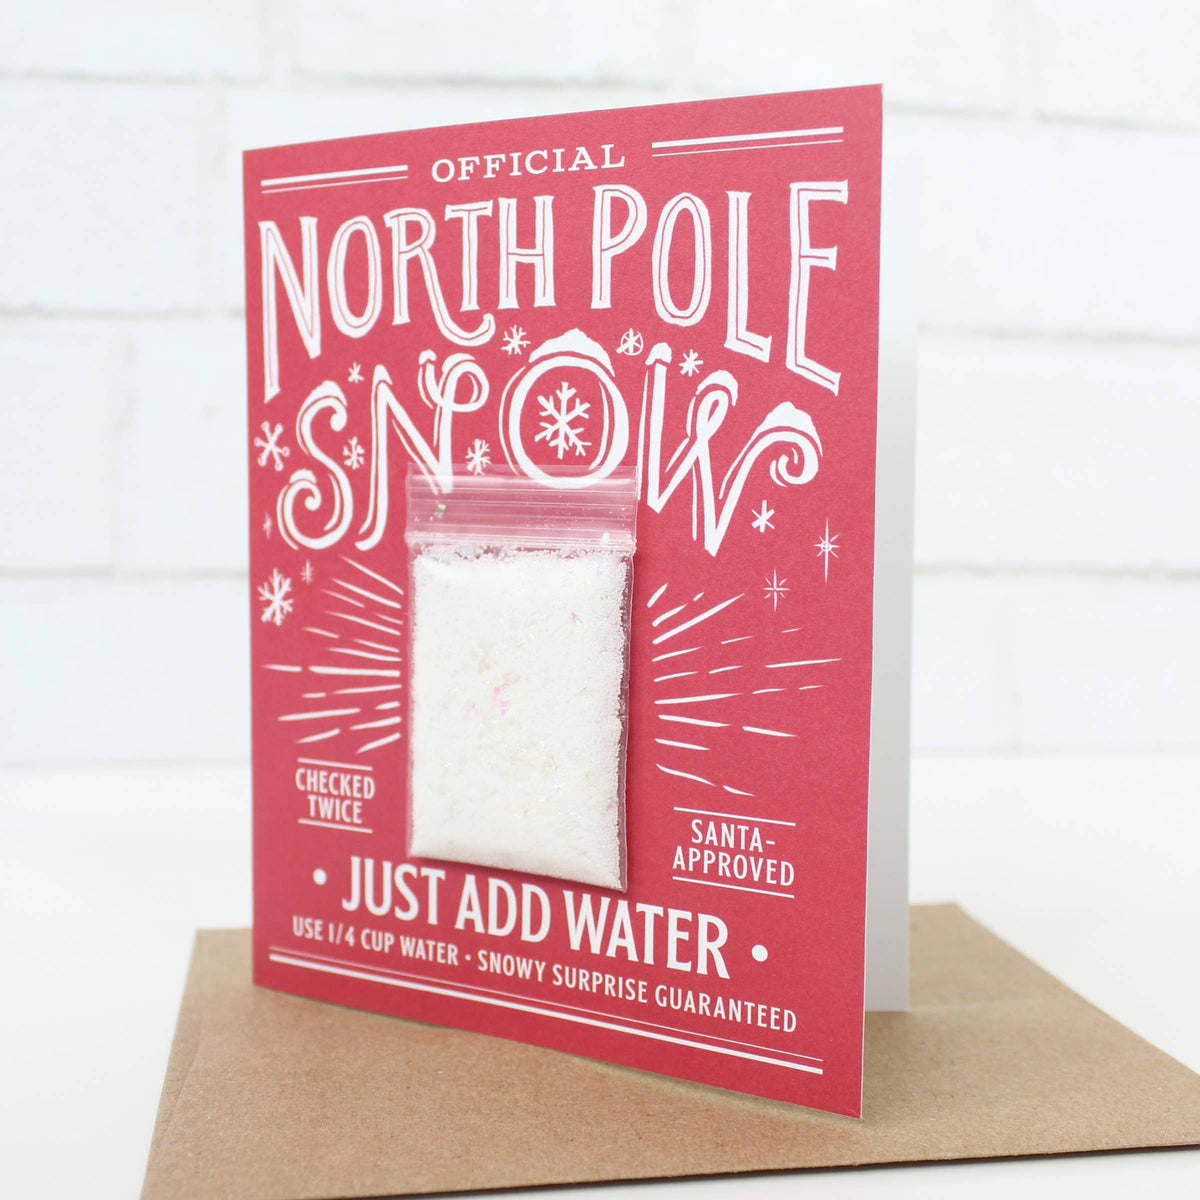 Mail a Snowball Holiday Card